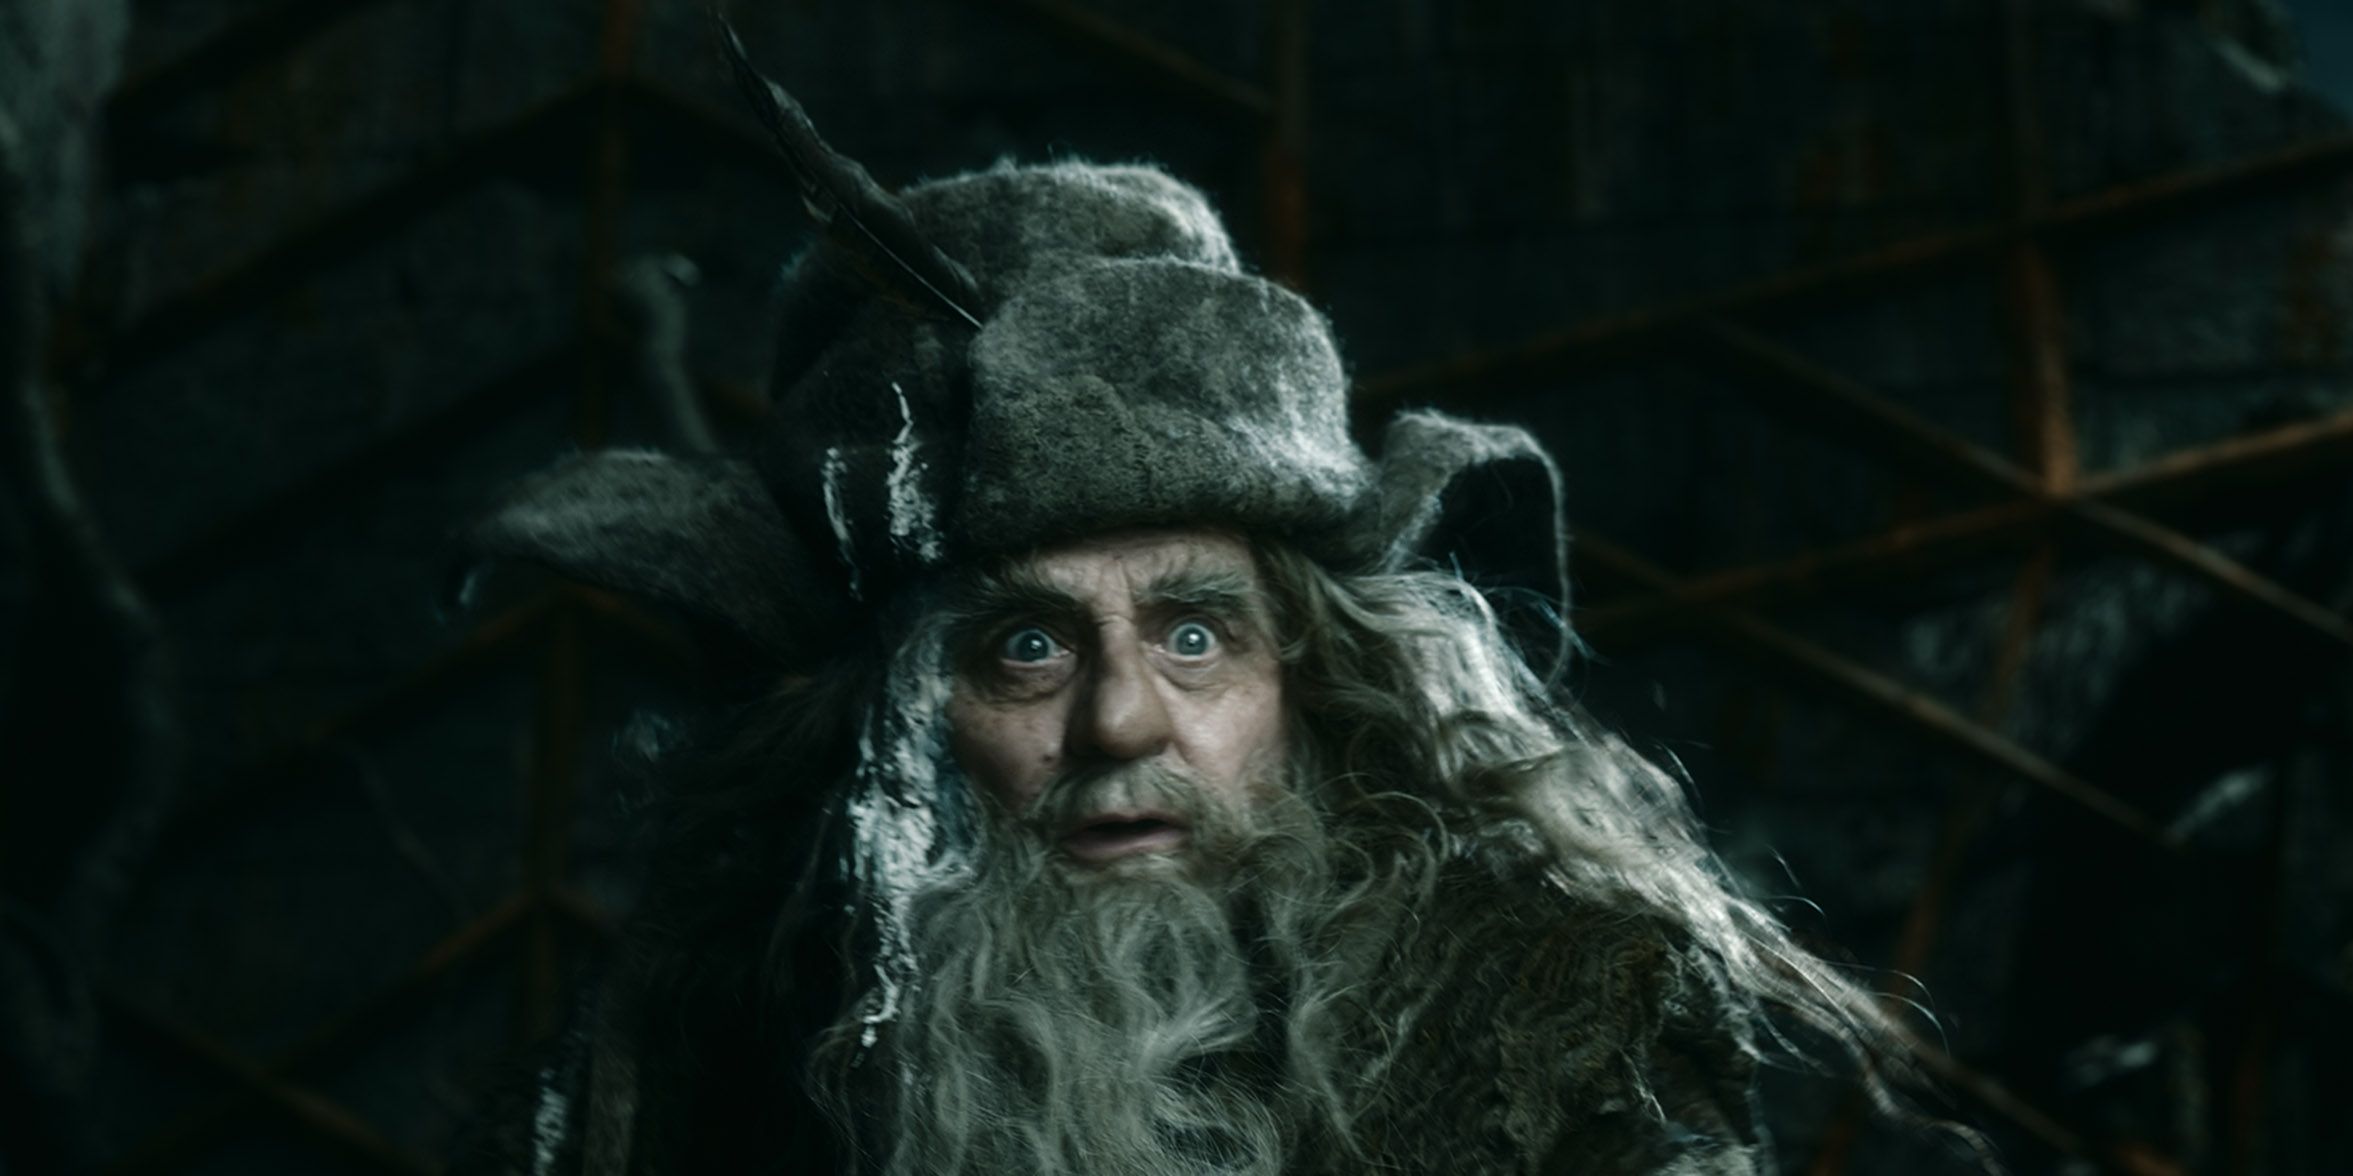 Sylvester McCoy as Radagast - The Battle of the Five Armies